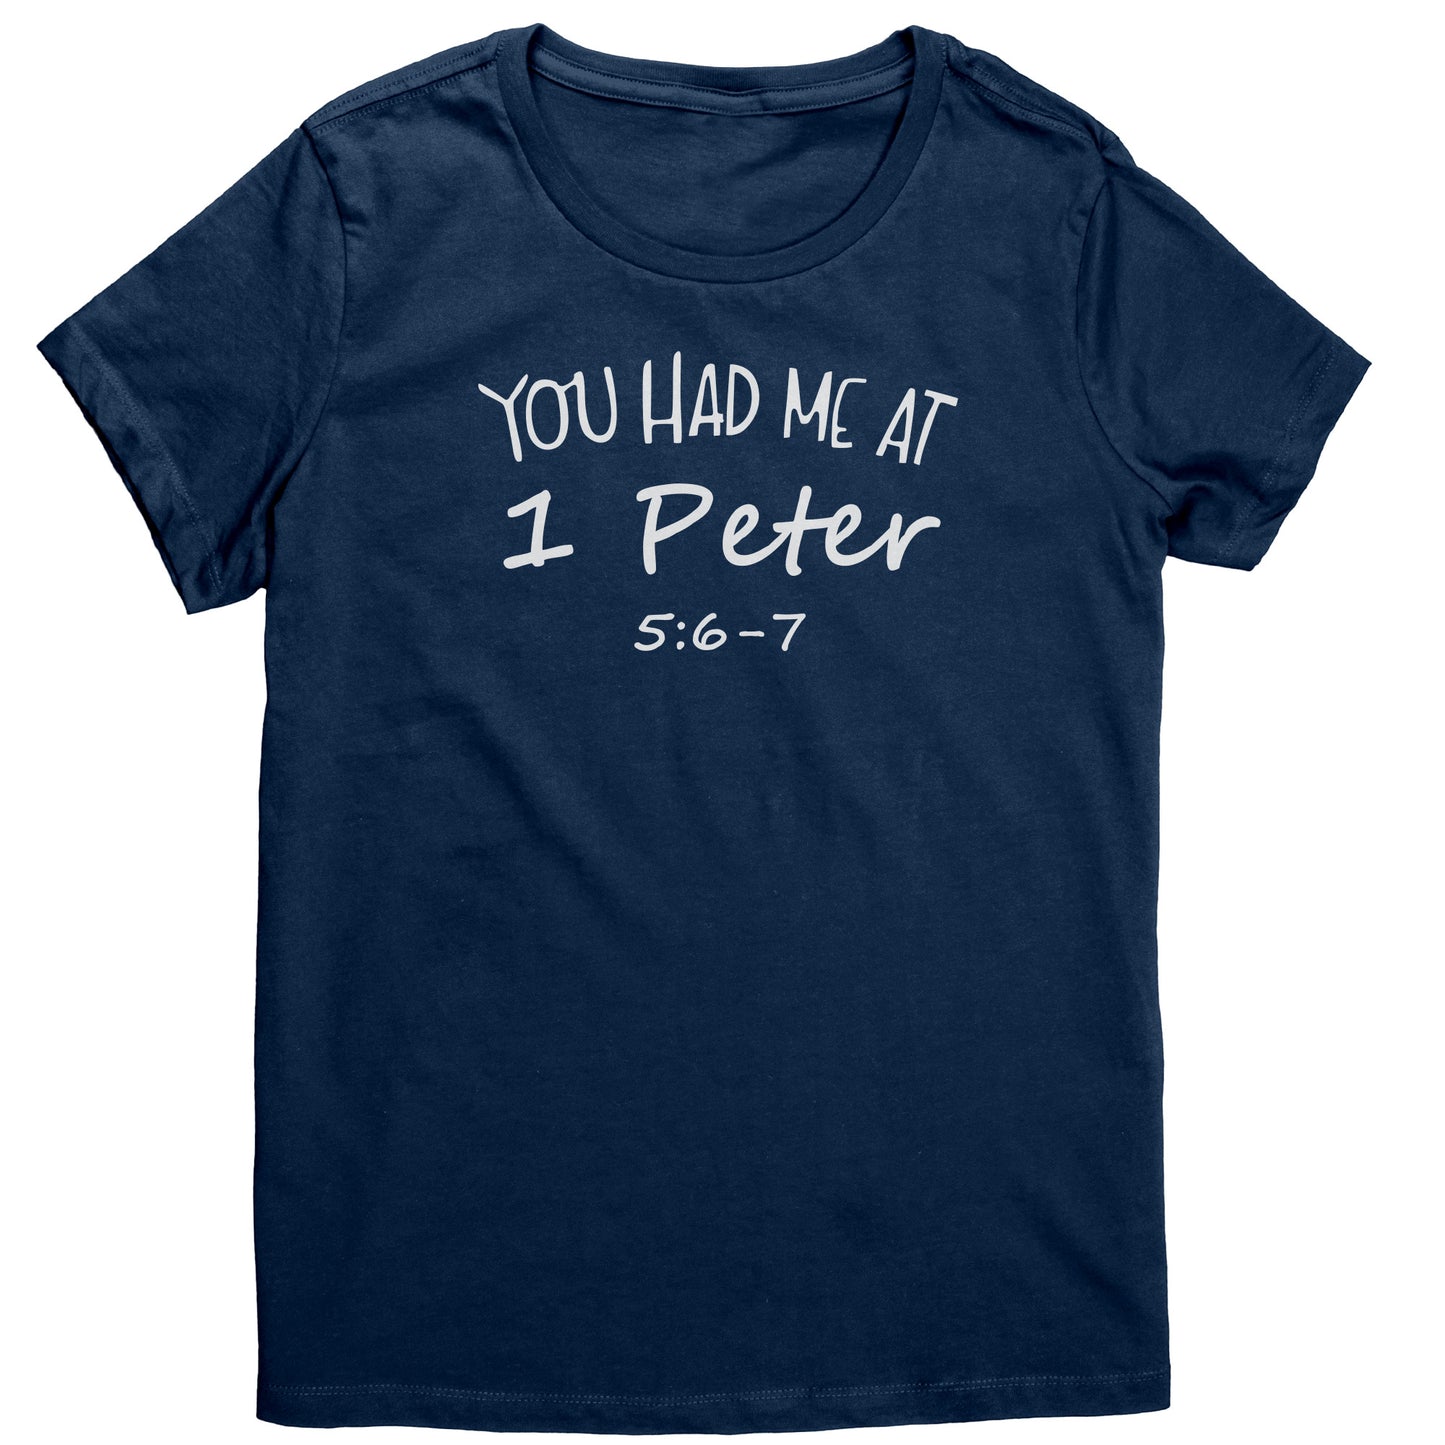 You Had Me At 1 Peter 5:6-7 Women's T-Shirt Part 2